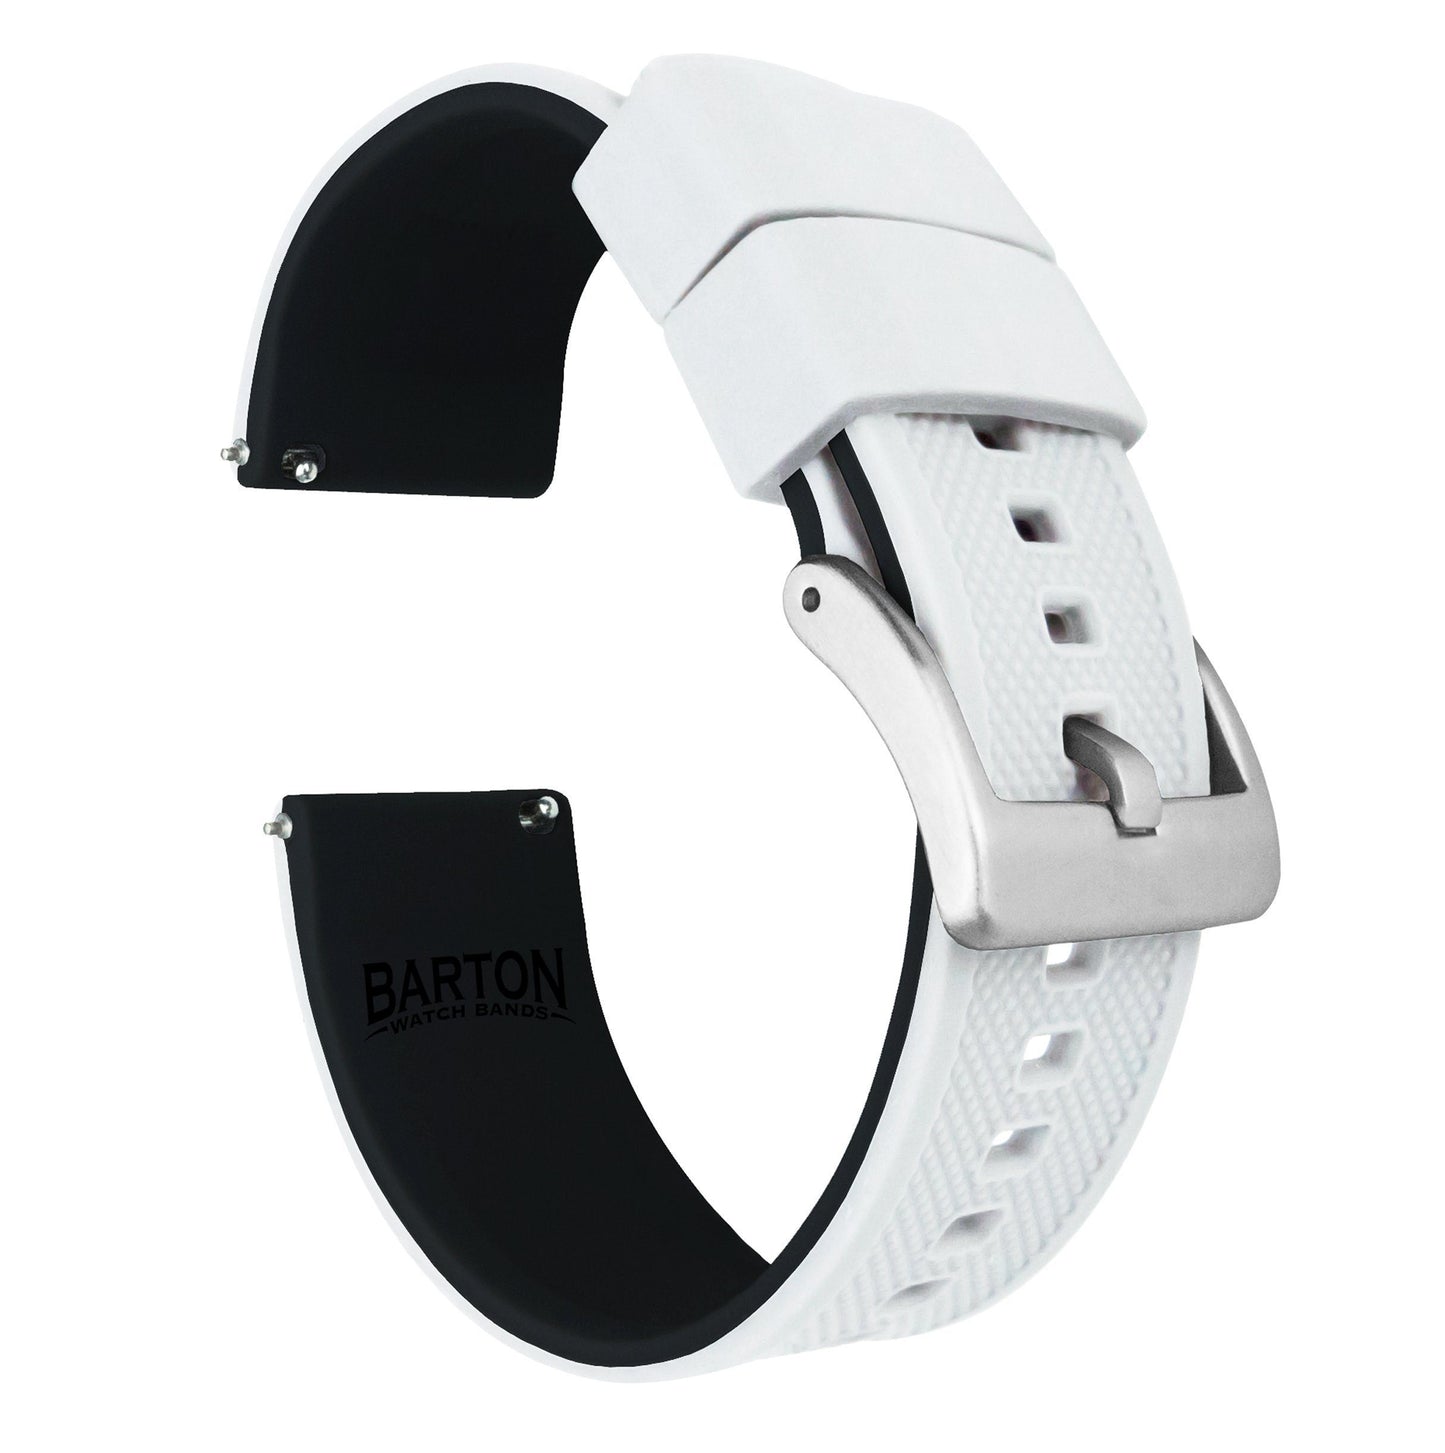 Pebble Smart Watches | Elite Silicone | White Top / Black Bottom - Barton Watch Bands